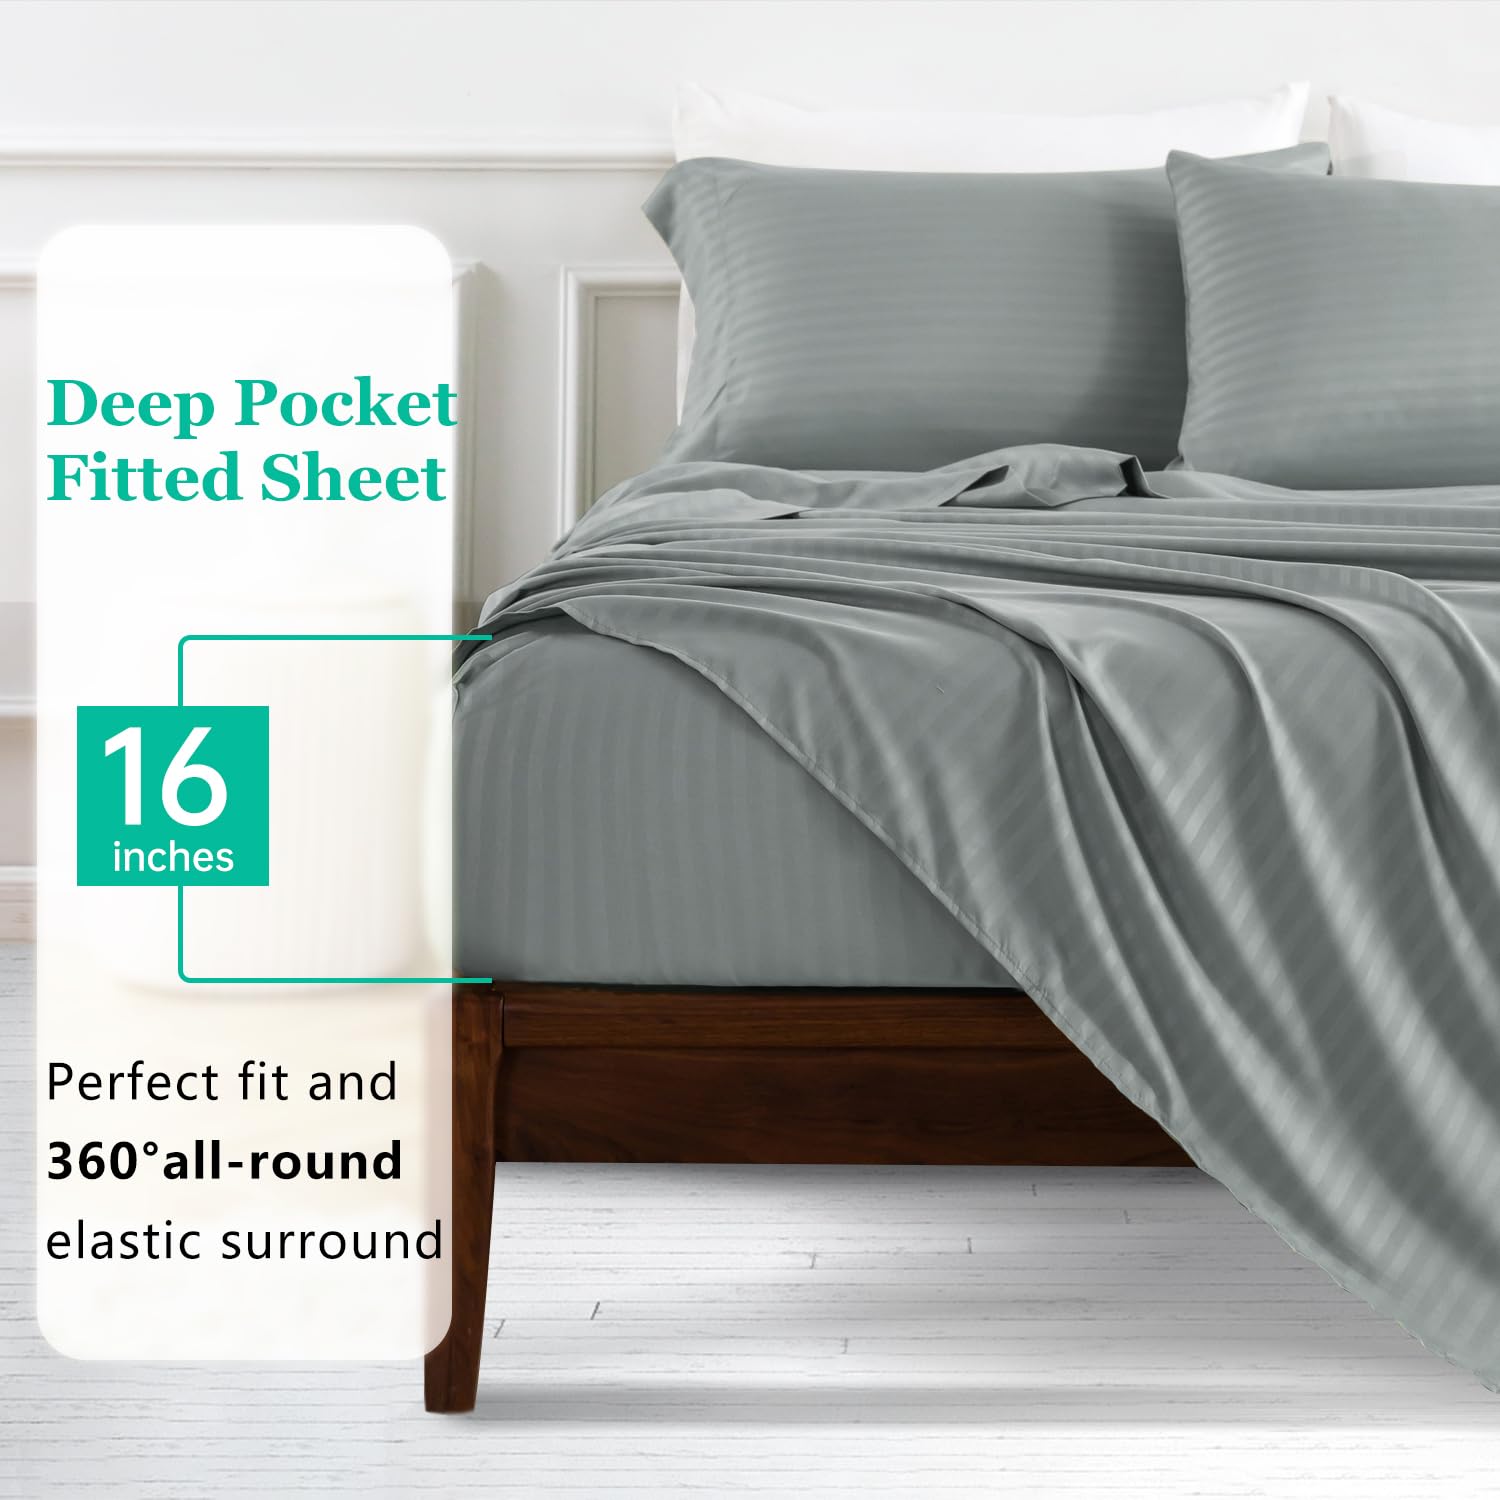 Great Choice Products Queen Size Bed Sheets, 100% Microfiber Striped Sheets Set Queen Luxury Hotel Soft Cooling Sheets, 16" Deep Pocket Sheets